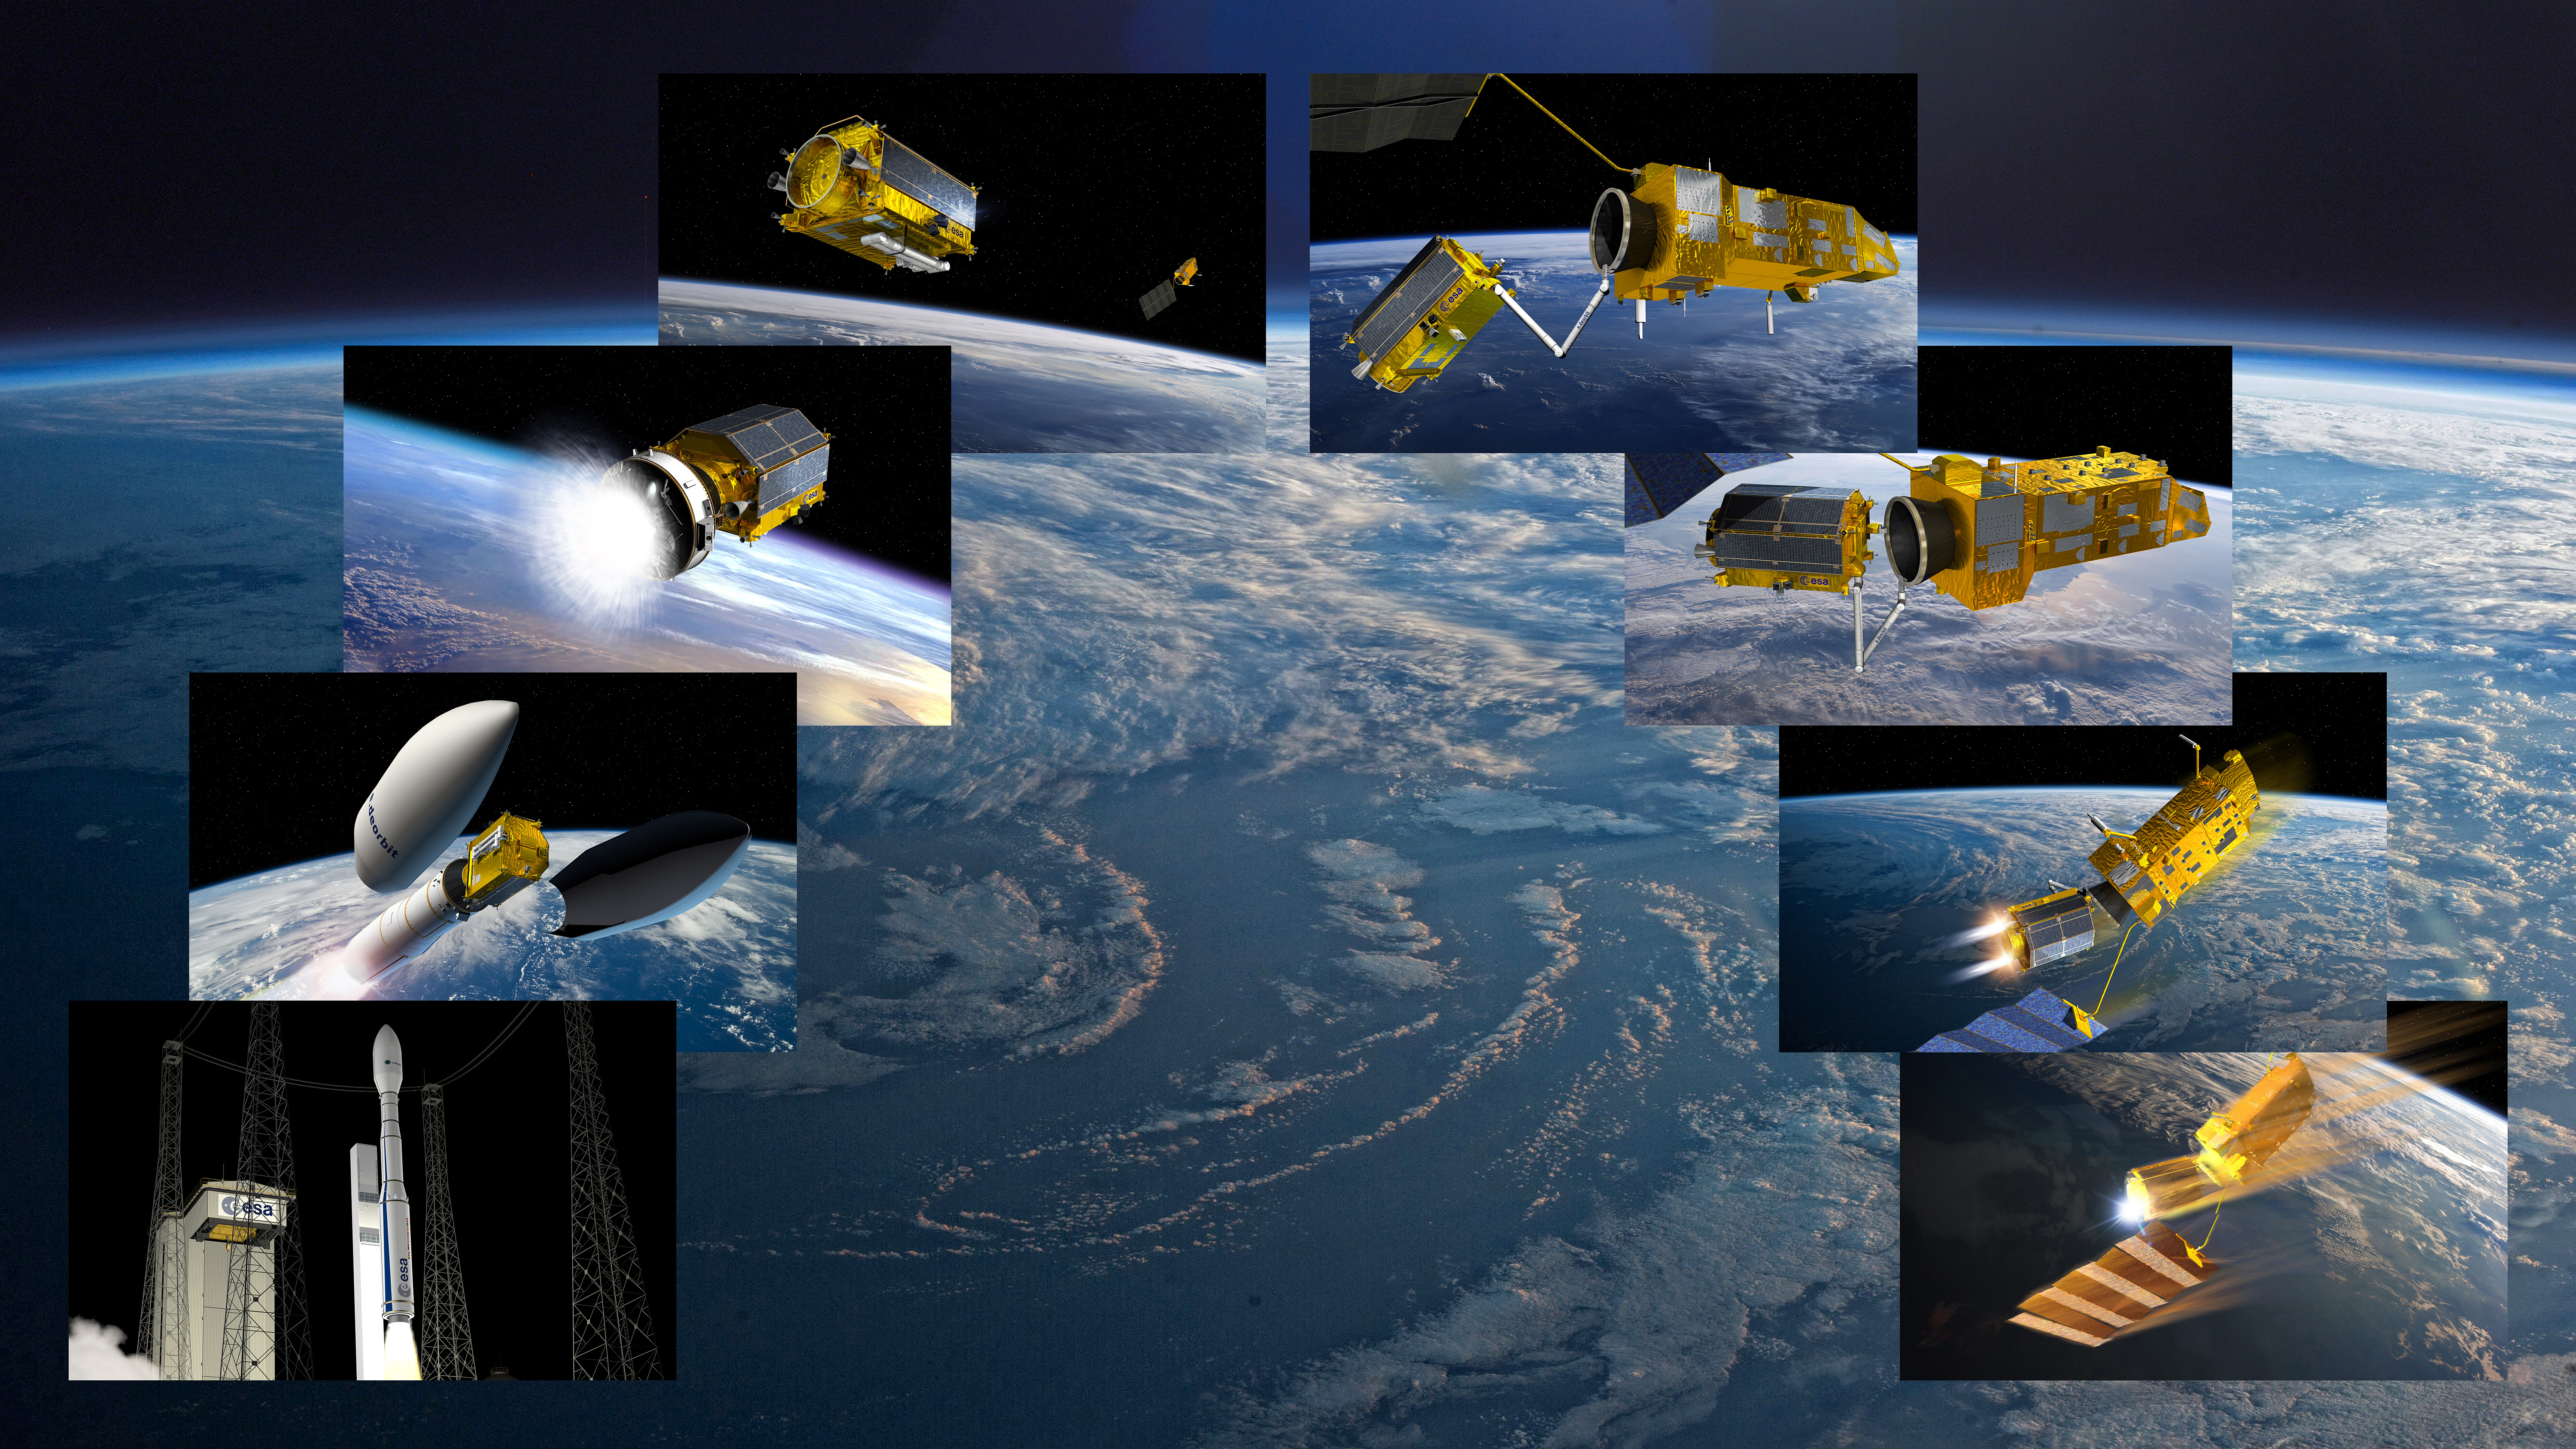 e.Deorbit was an ESA mission to remove a single large ESA-owned debris from orbit